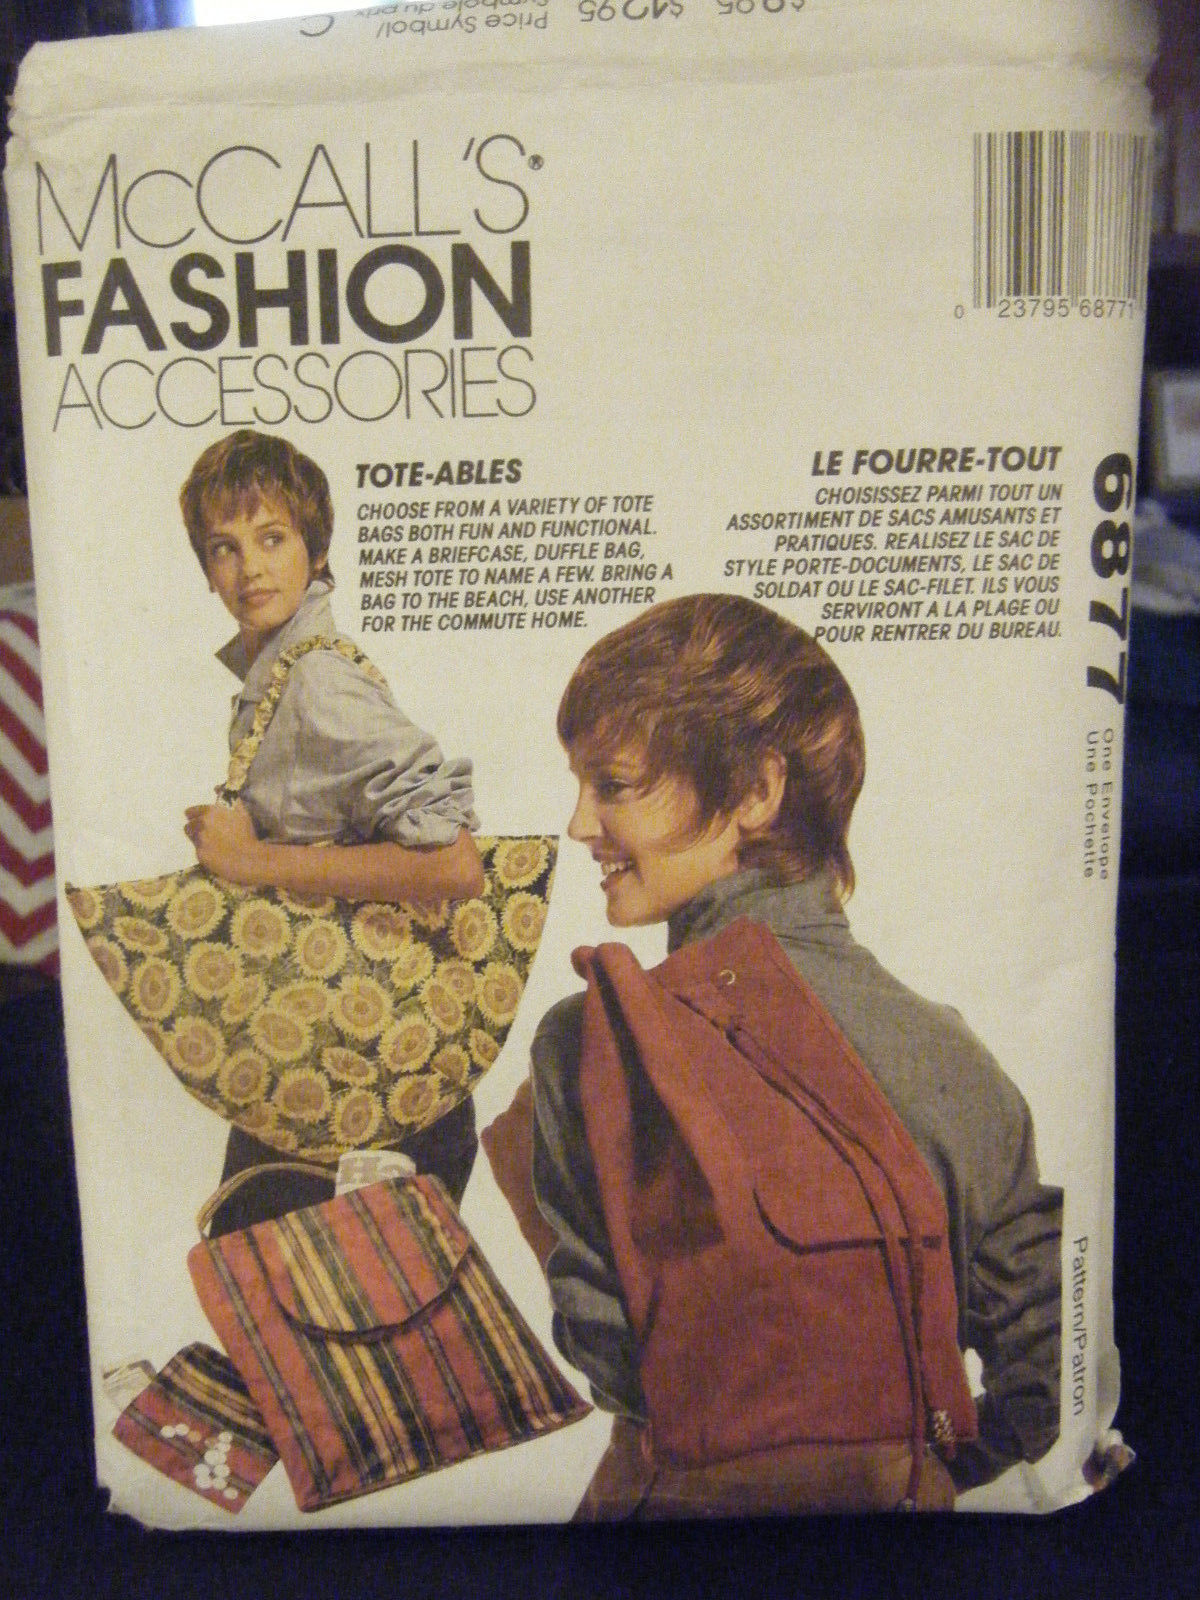 McCall's Fashion Accessories Assorted Tote Bags Pattern - $9.00